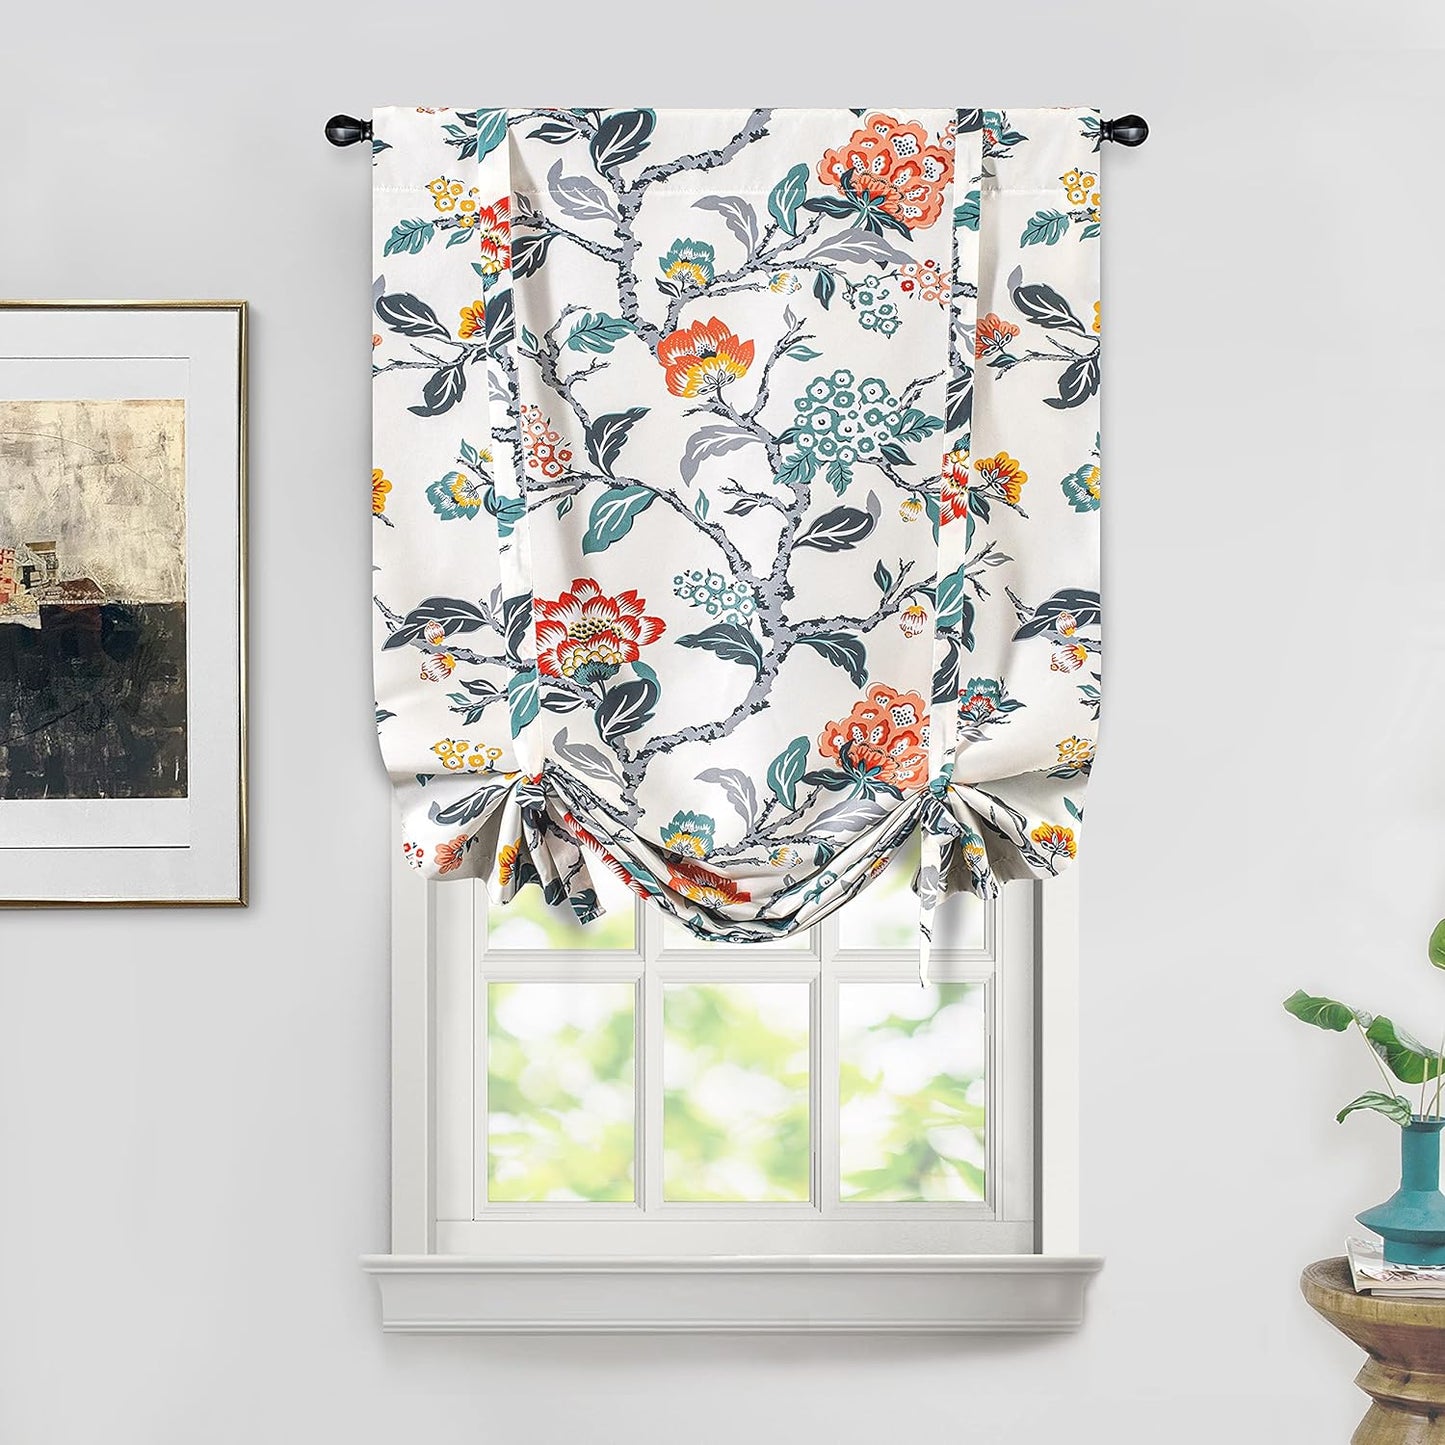 Driftaway Ada Botanical Print Lined Flower Leaf Tie up Curtain Thermal Insulated Privacy Blackout Window Adjustable Balloon Curtain Shade Rod Pocket Single 39 Inch by 55 Inch Ivory Orange Teal  DriftAway 1 25"X47" 